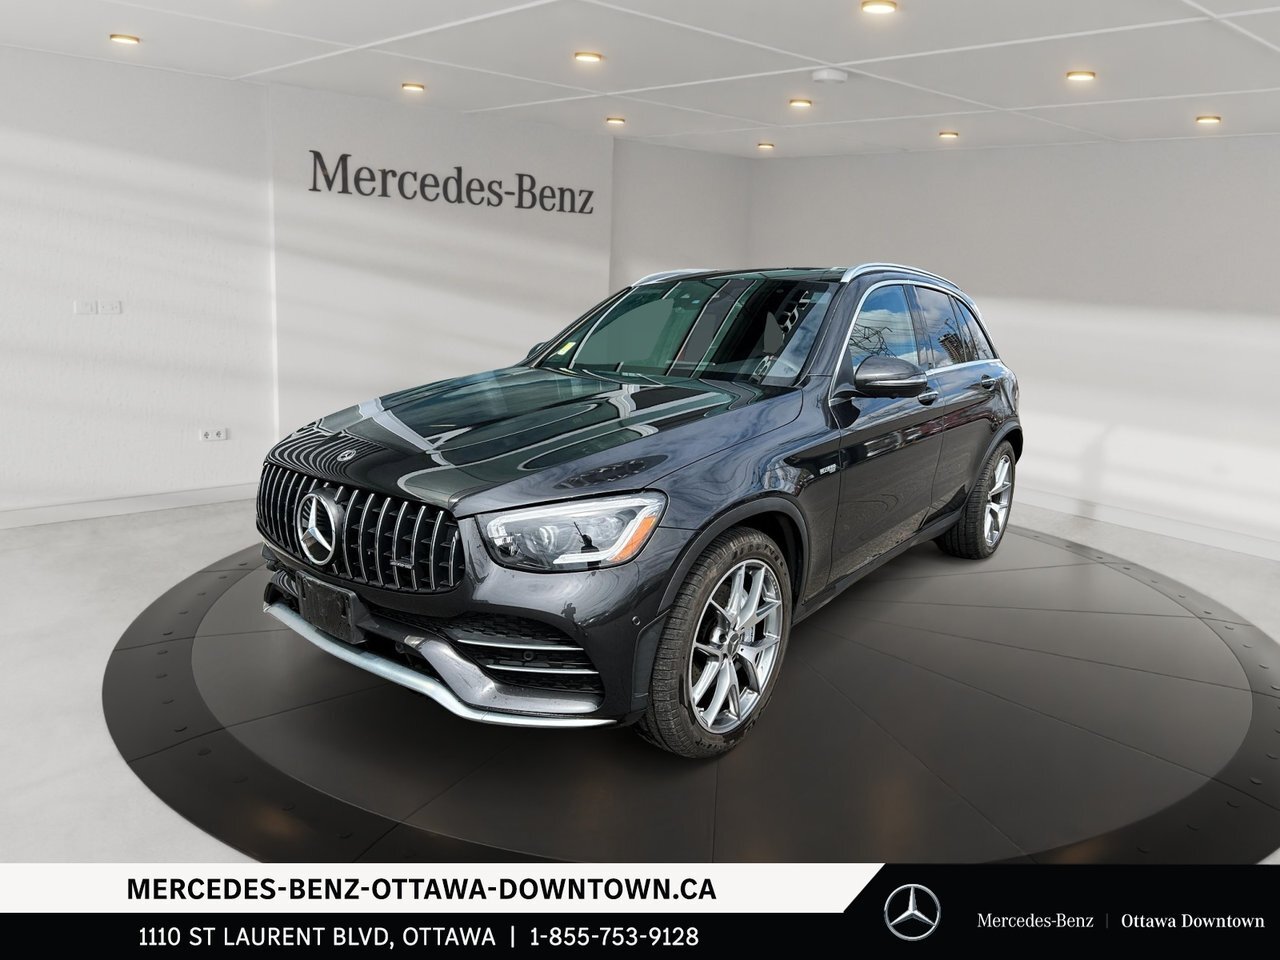 2021 Mercedes-Benz AMG GLC 43 4MATIC SUV loaded AMG Clean low mileage all the ri